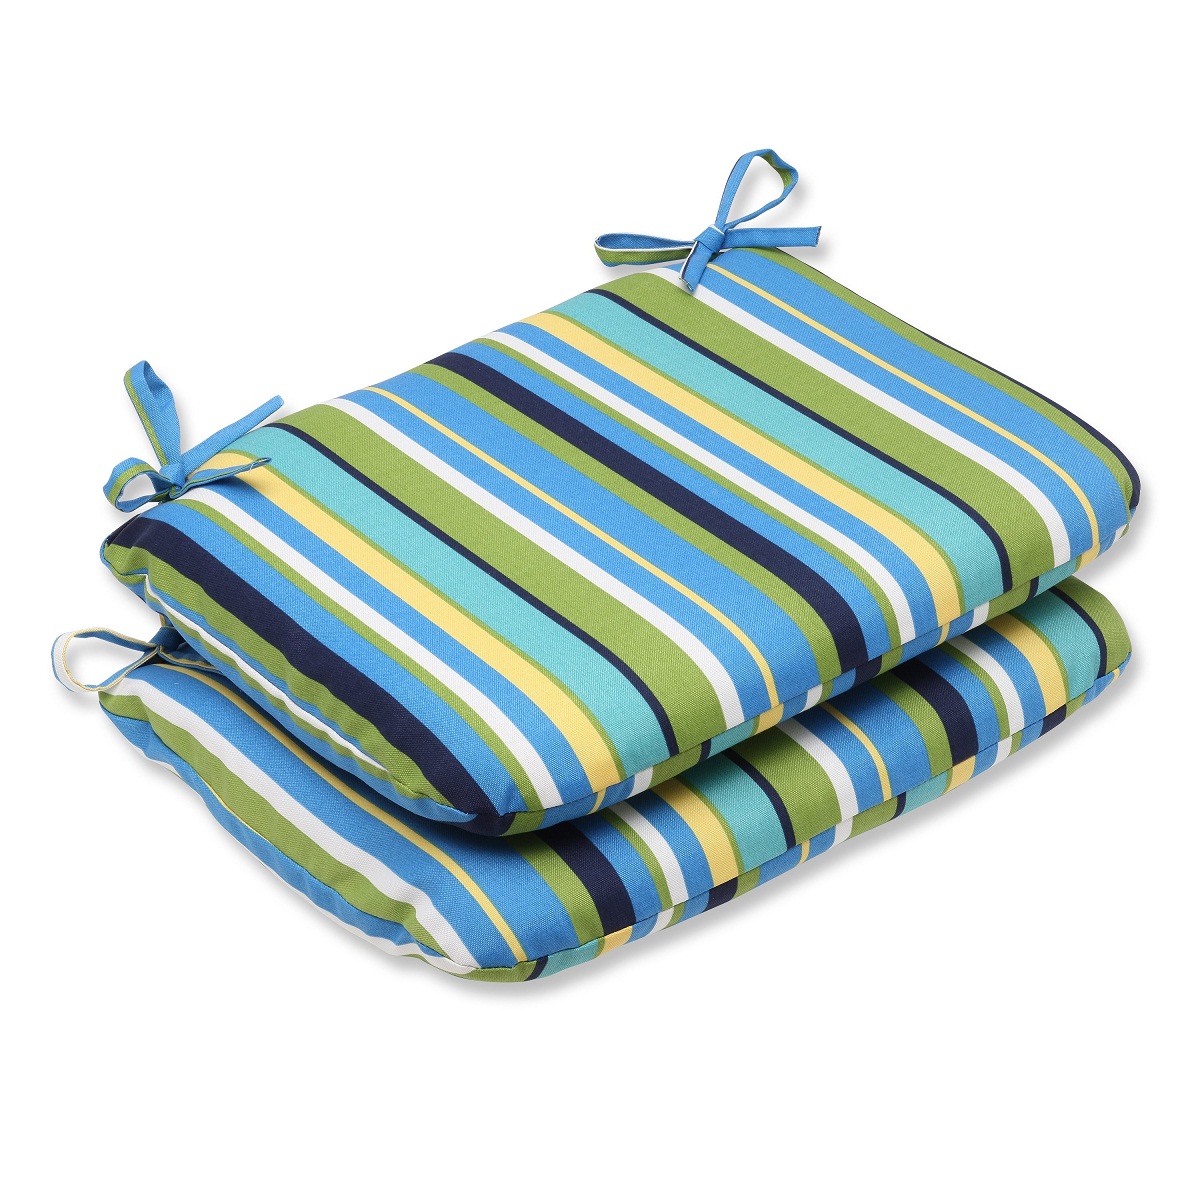 Pillow Perfect Set of 2 Strisce Luminose Blue and Green Striped Outdoor Patio Rounded Seat Cushions 18.5"